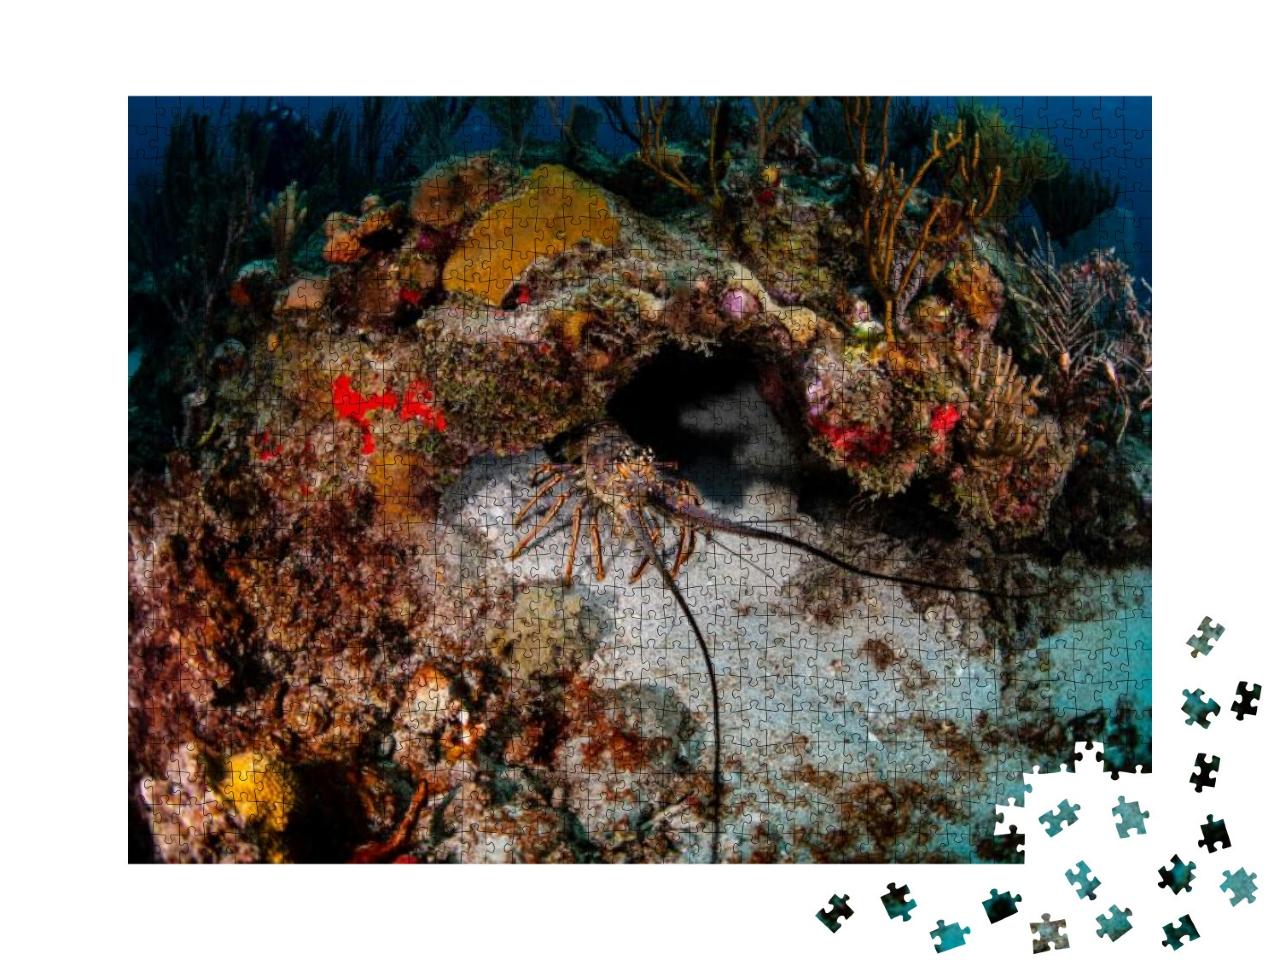 A Lobster Crawling Out of His Hole in the Reef... Jigsaw Puzzle with 1000 pieces